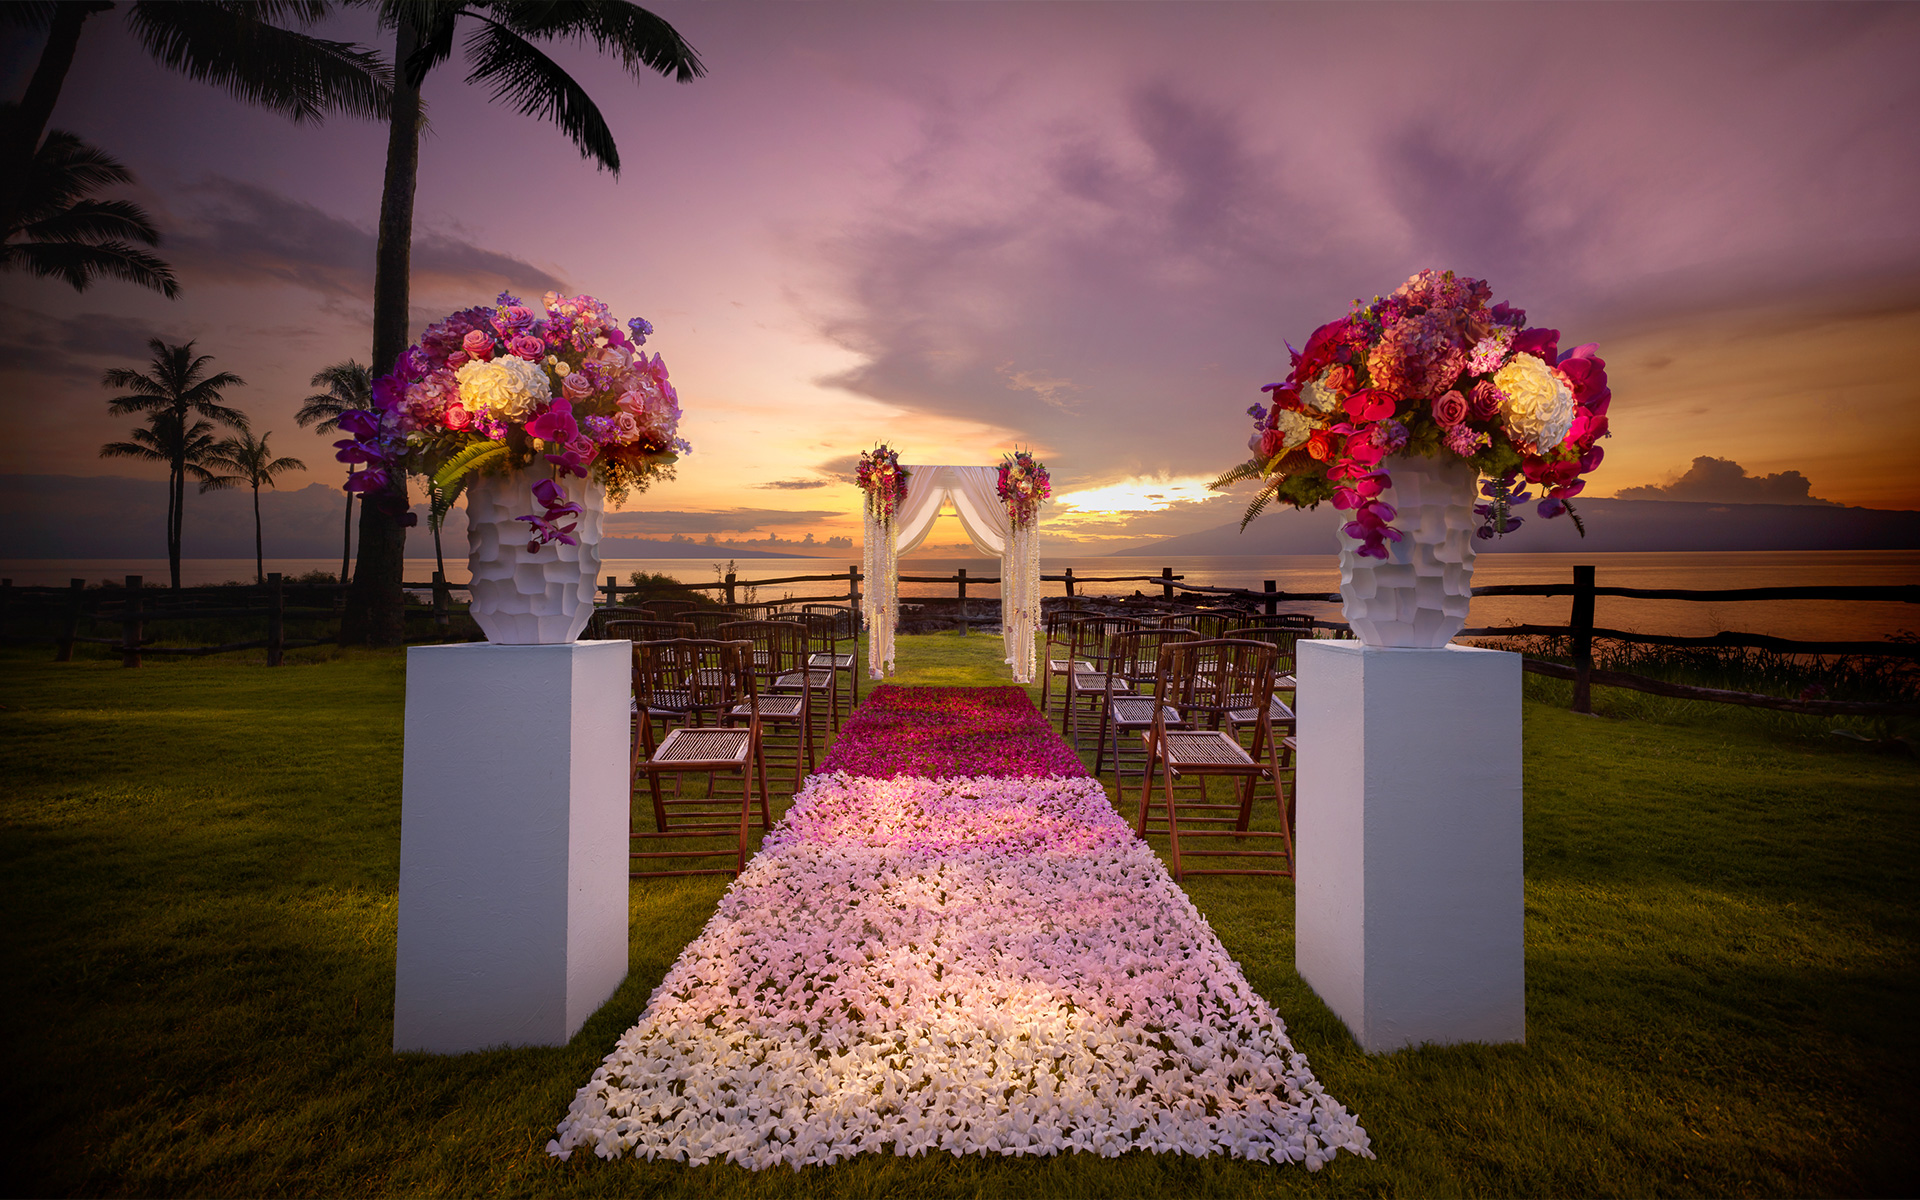 Sunset wedding ceremony at Namalu Lawn located between The Cliff House and Kapalua Bay